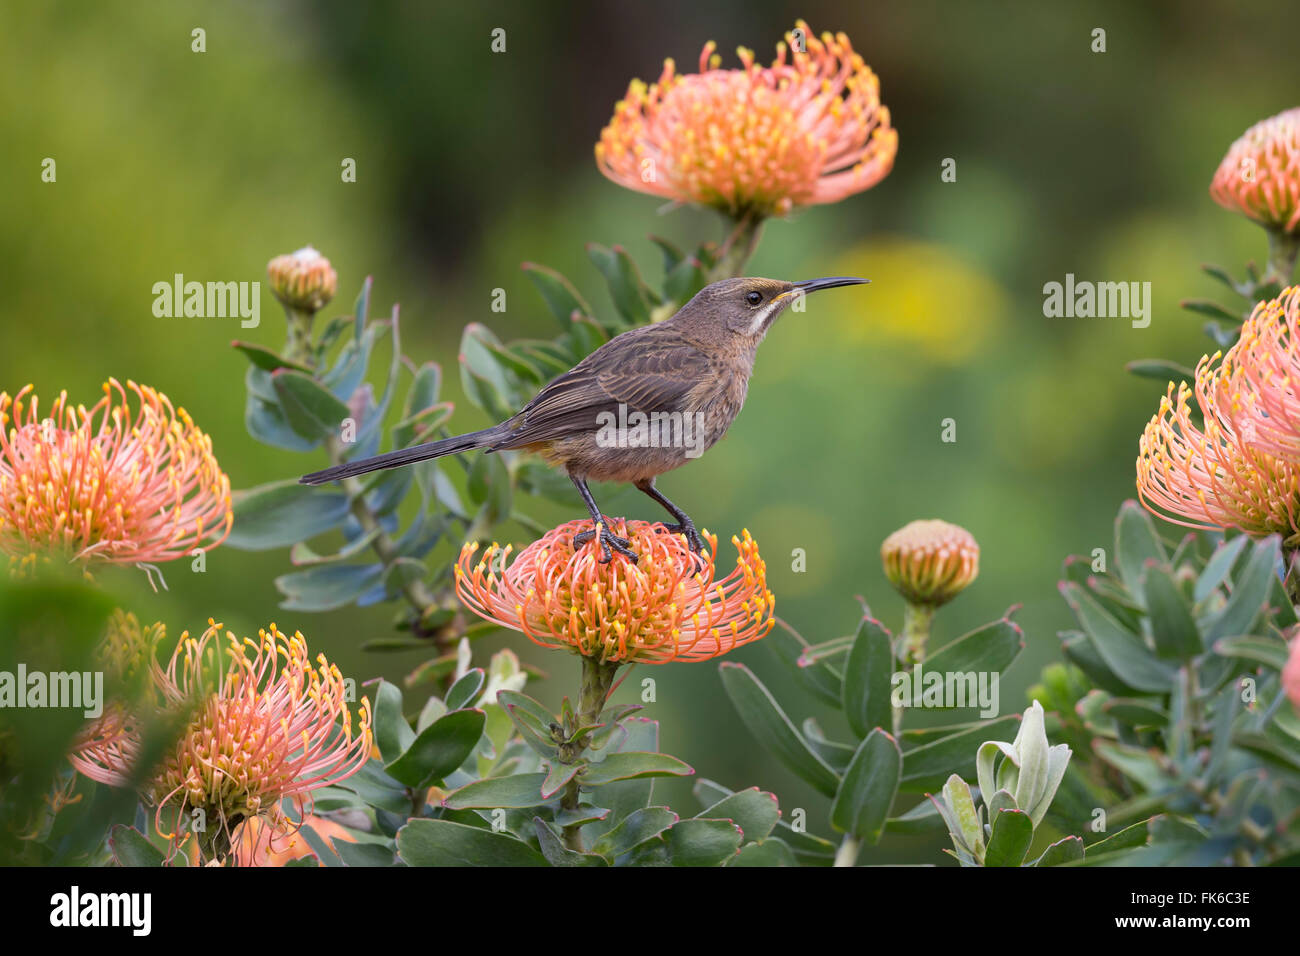 Cape sugarbird (Promerops cafer), perched on protea, Harold Porter Botanical Gardens, Western Cape, South Africa, Africa Stock Photo